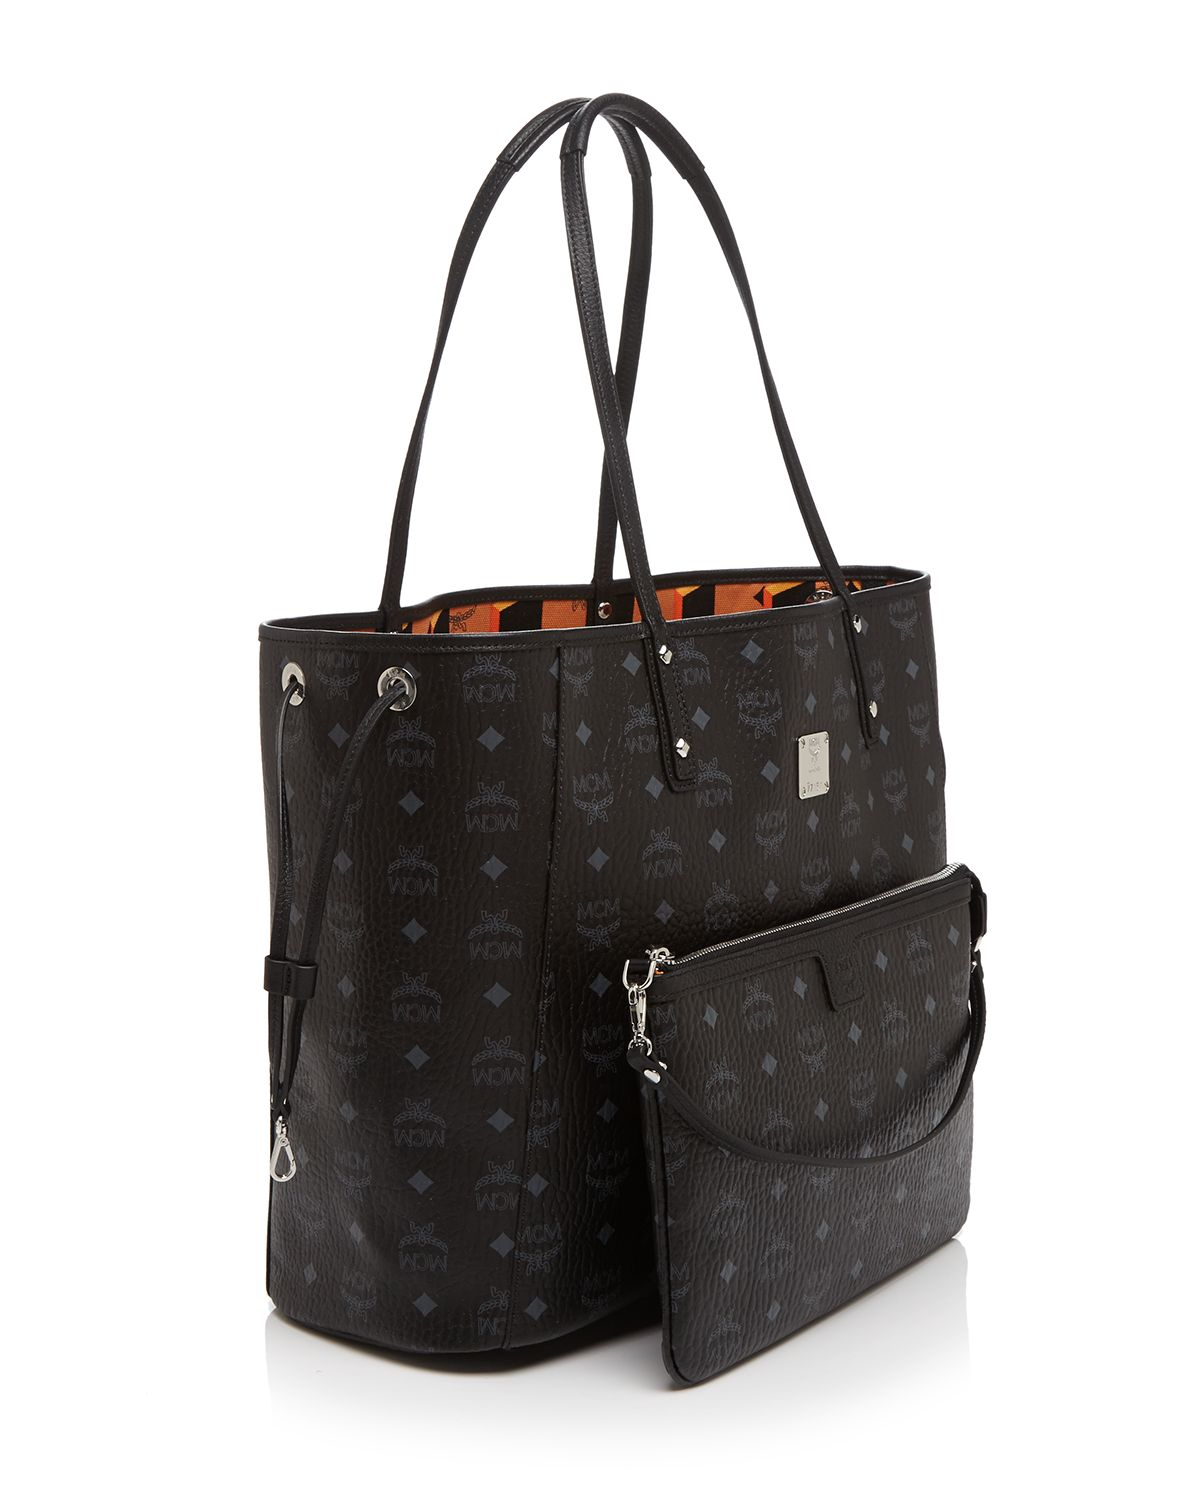 Mcm Shopper Project Visetos Reversible Large Tote in Black | Lyst